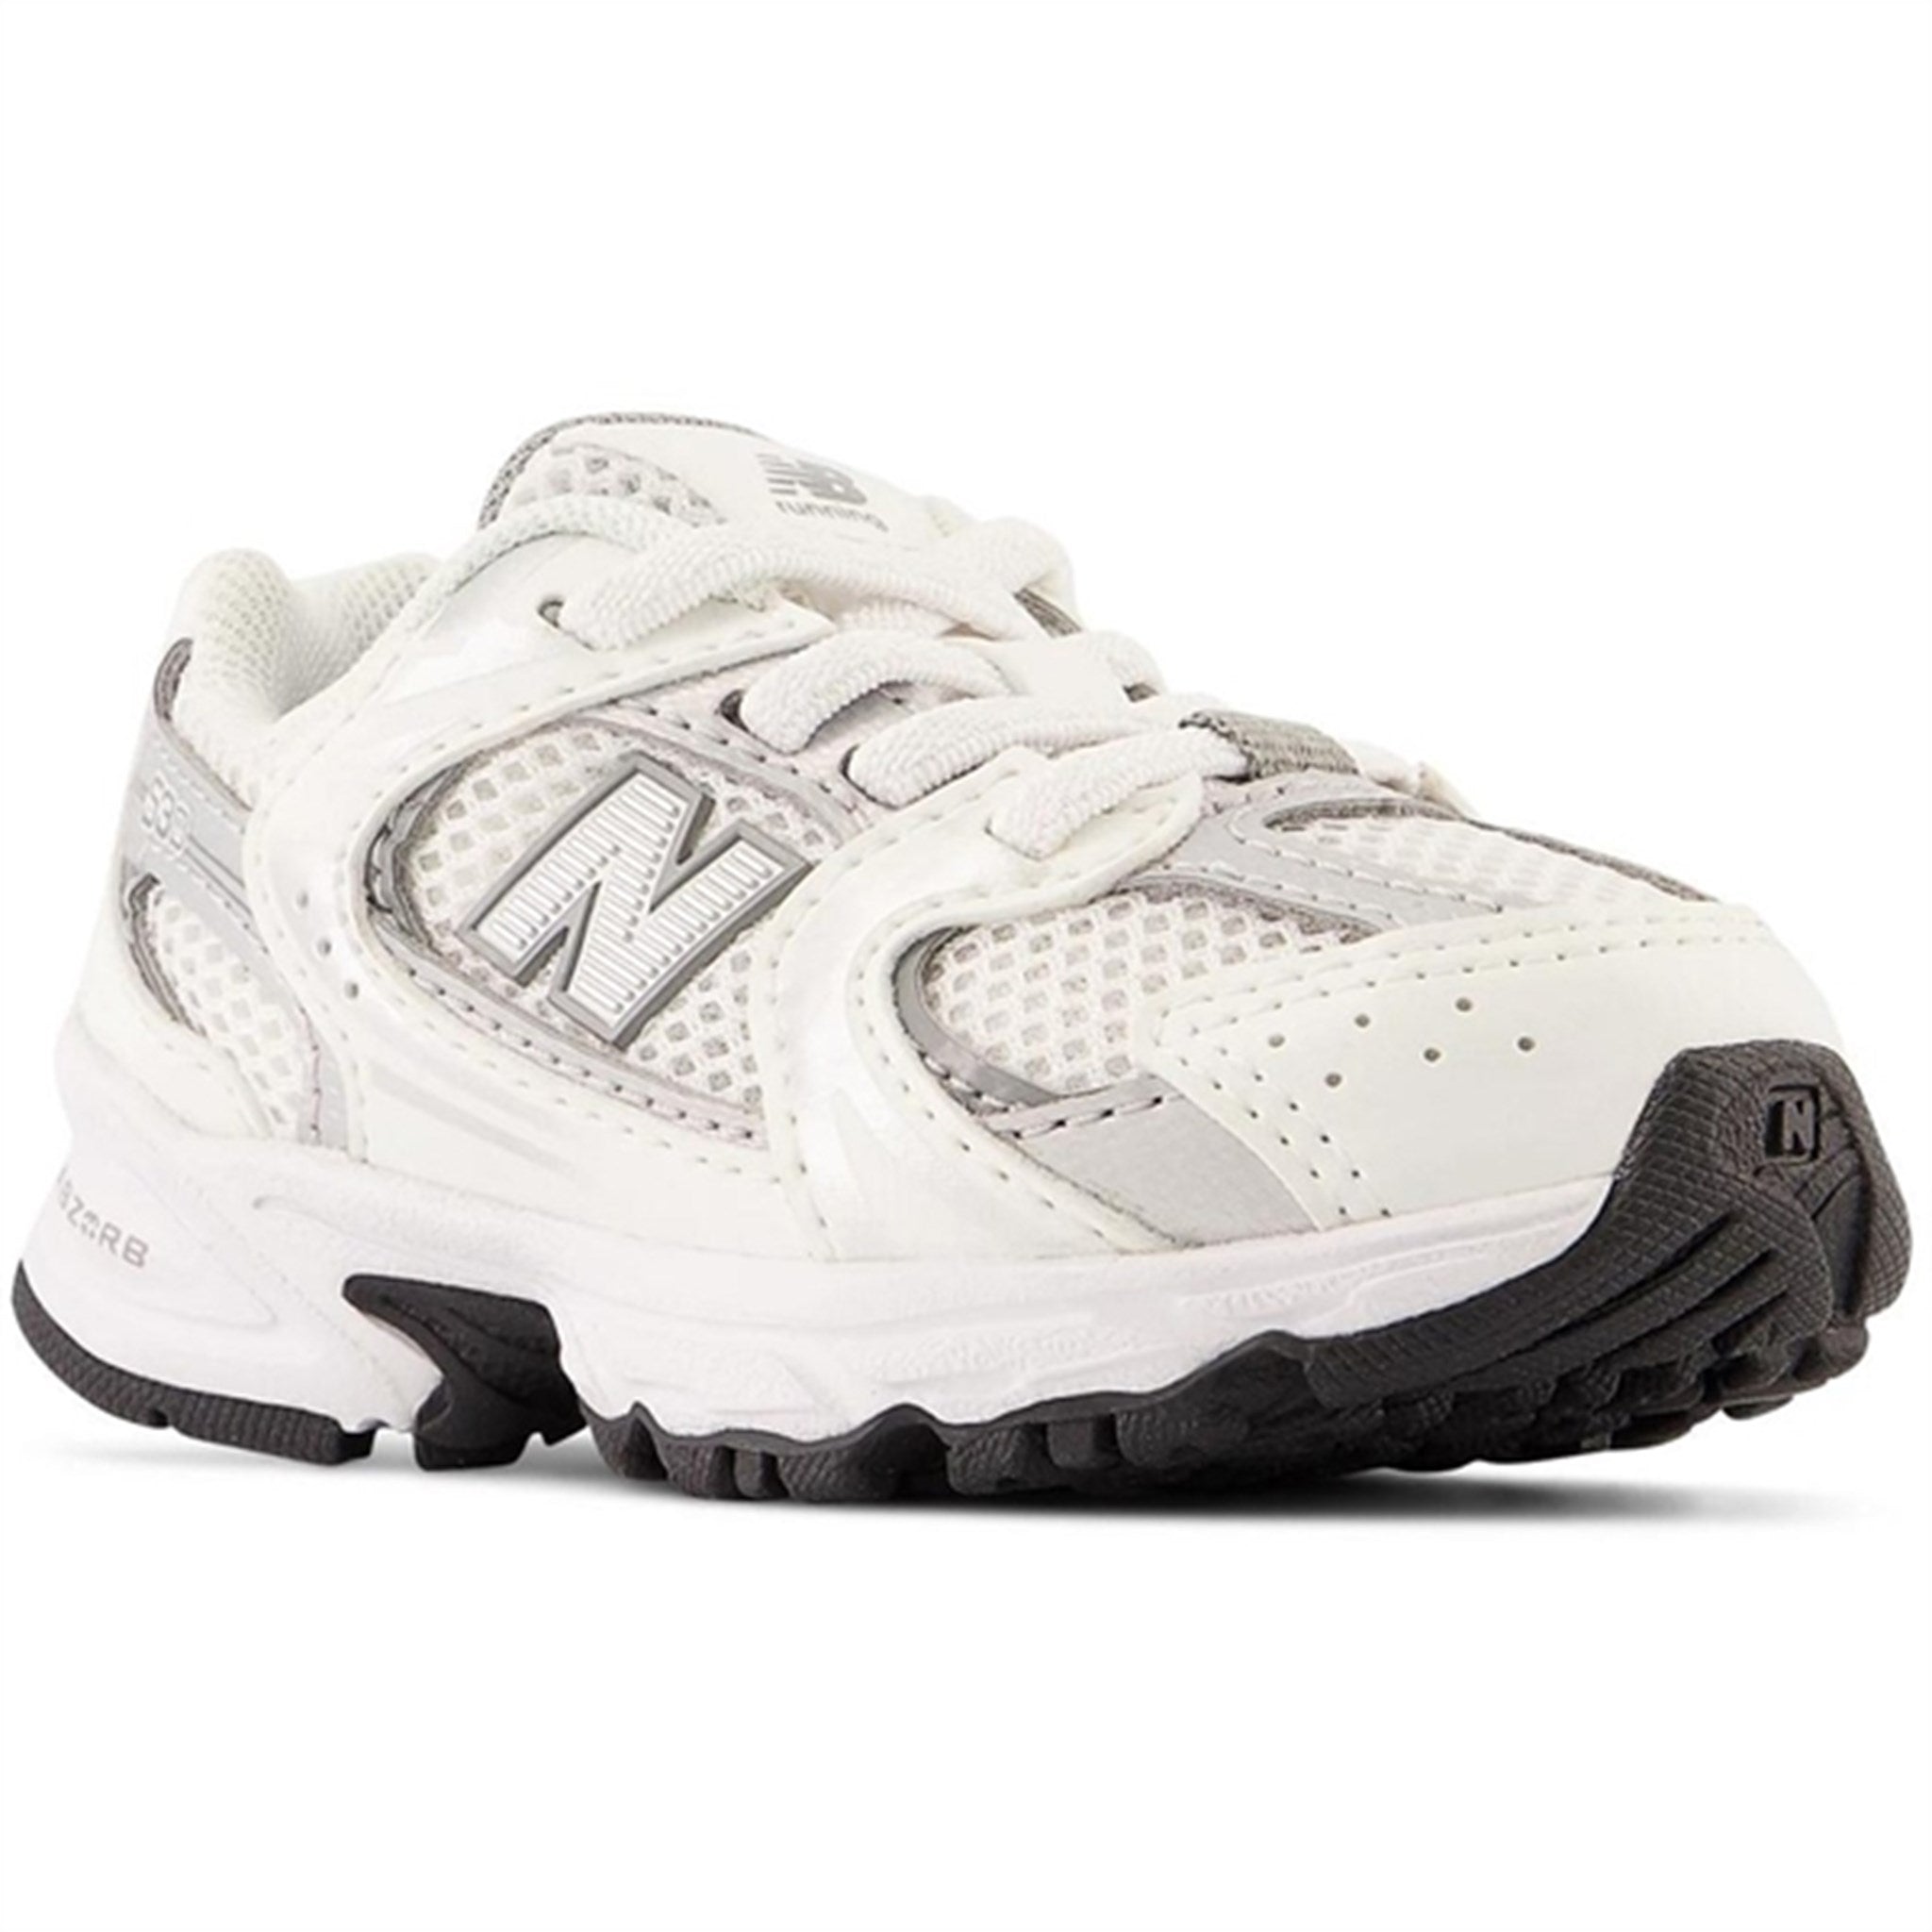 New Balance 530 Kids Bungee Lace Infant White 2